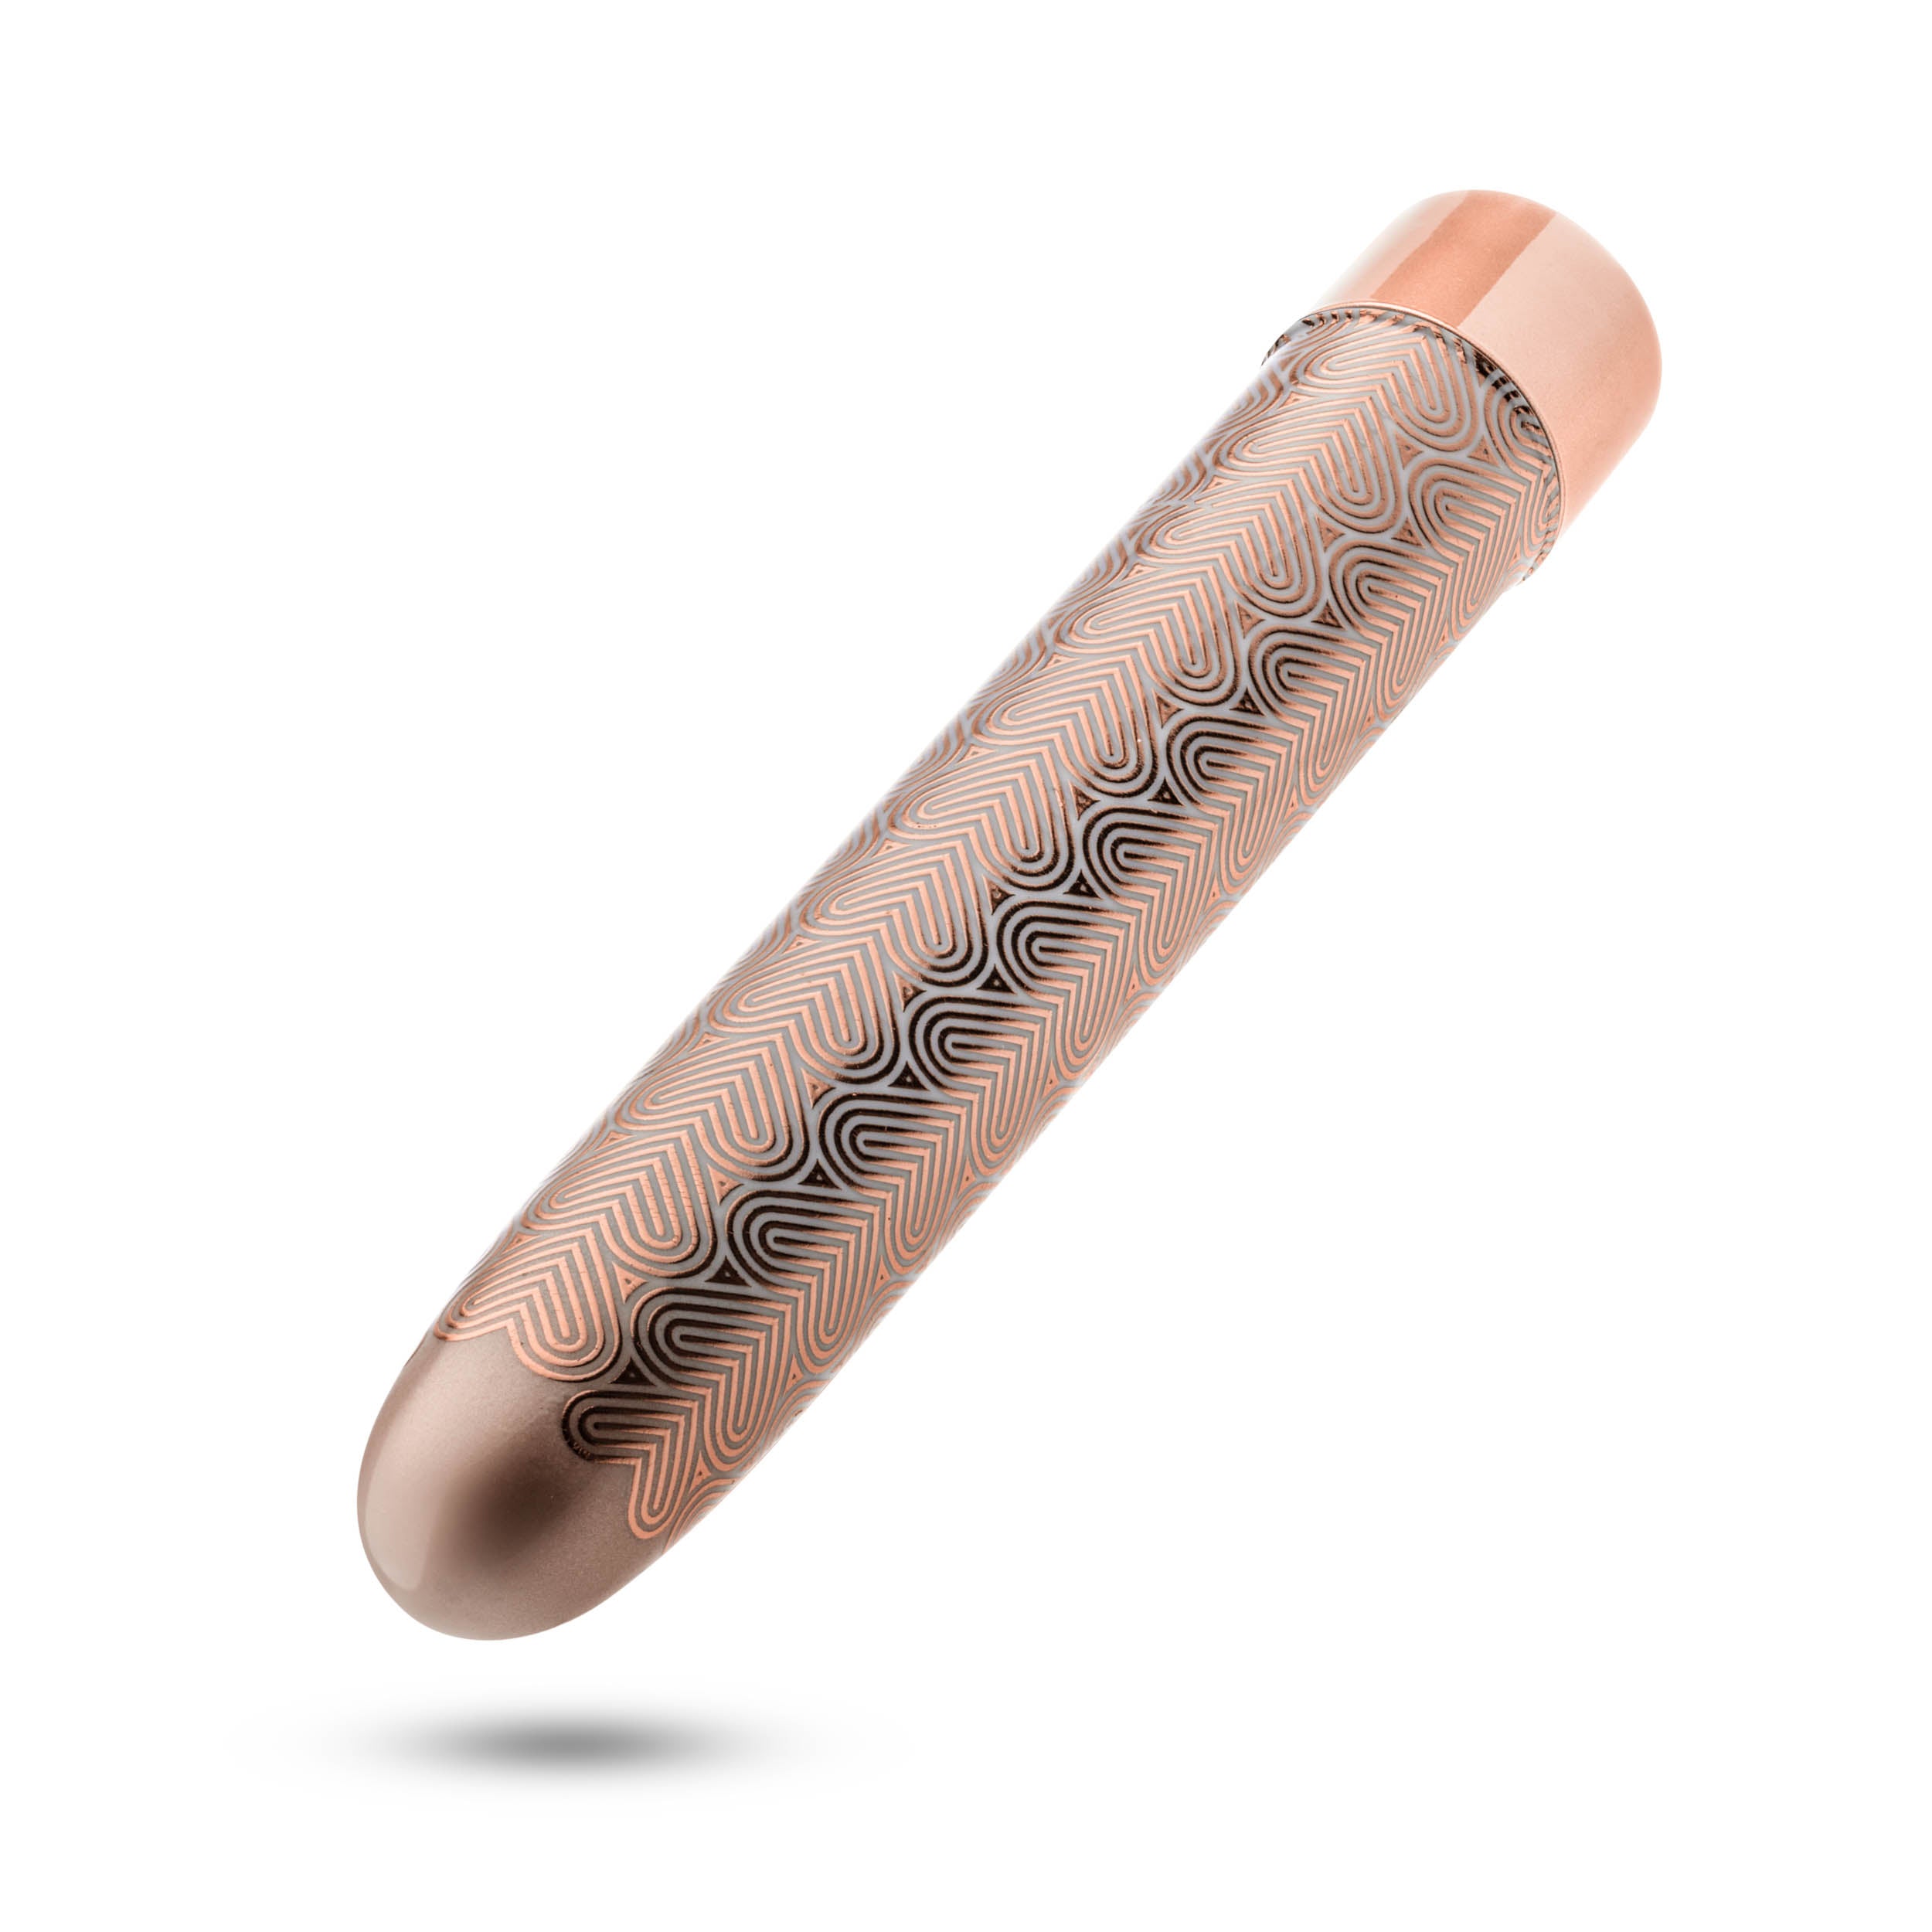 The Collection - Lattice - 7 Inch Rechargeable Vibe - Rose Gold-5